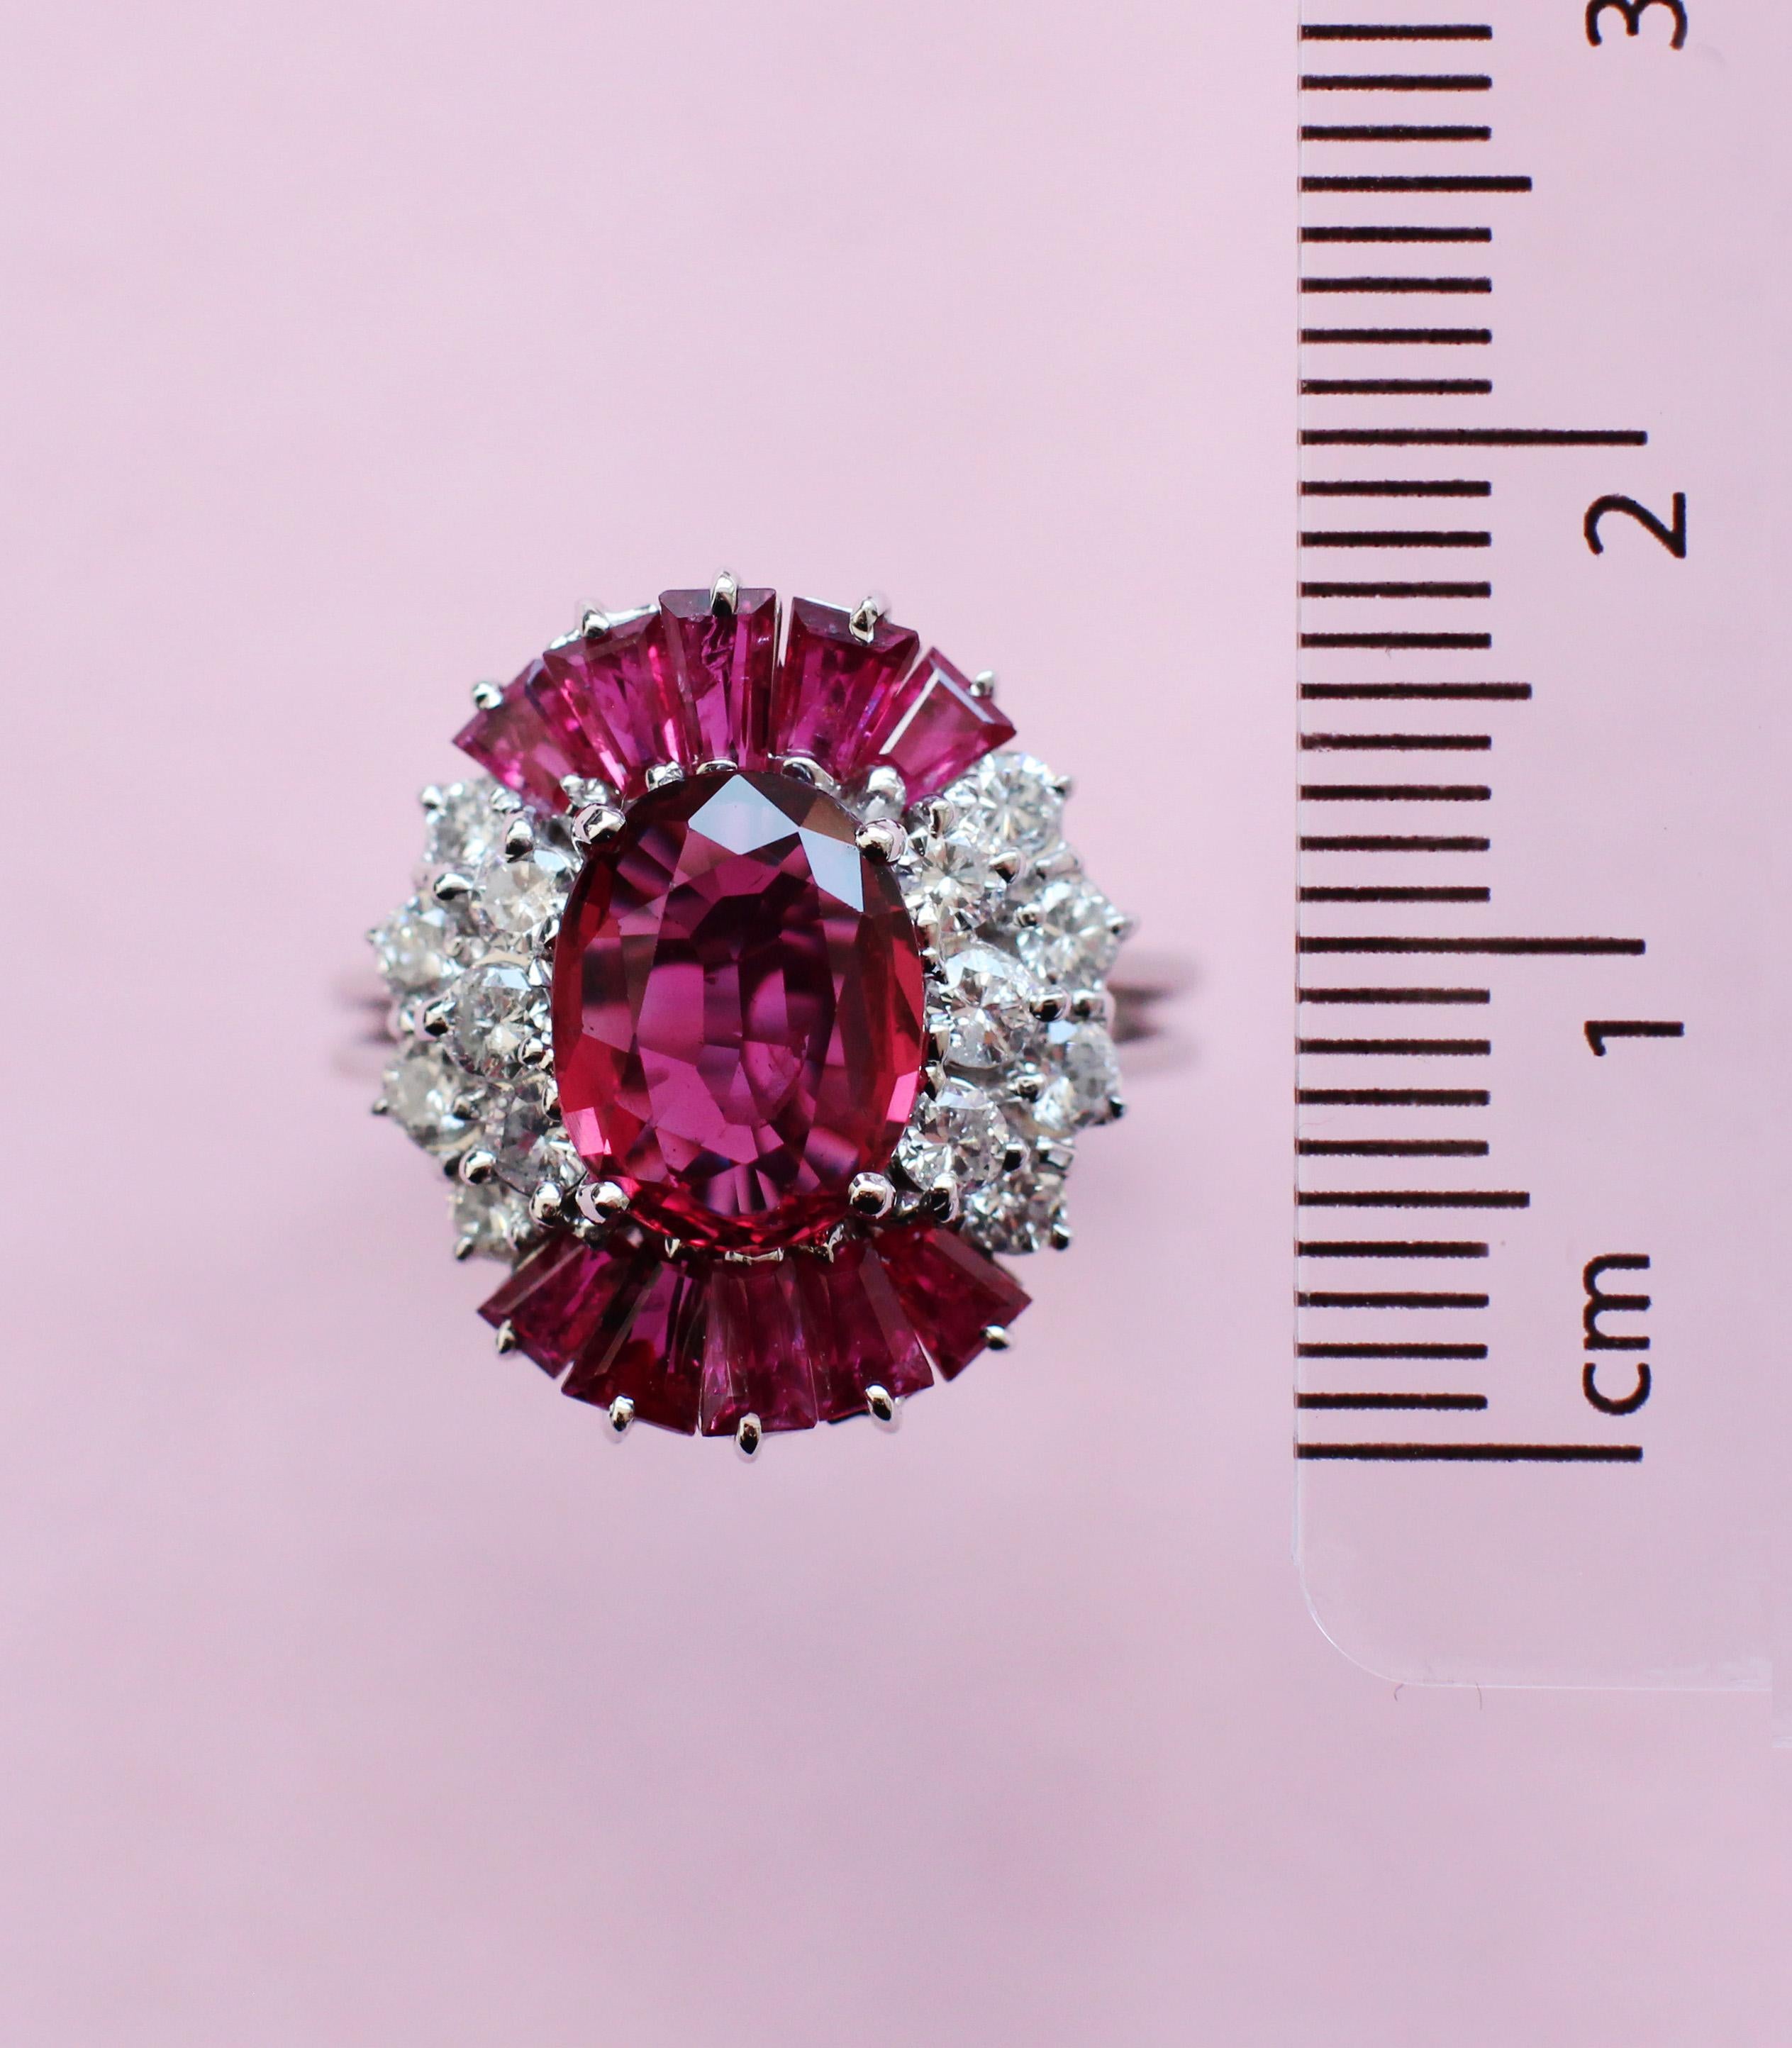 This vintage-style ring makes a big impression thanks to its unique design by the Haruni family. It boasts a sensational oval ruby in a vivid purplish red colour at its centre, with smaller baguette rubies featuring amongst the mostly white diamond